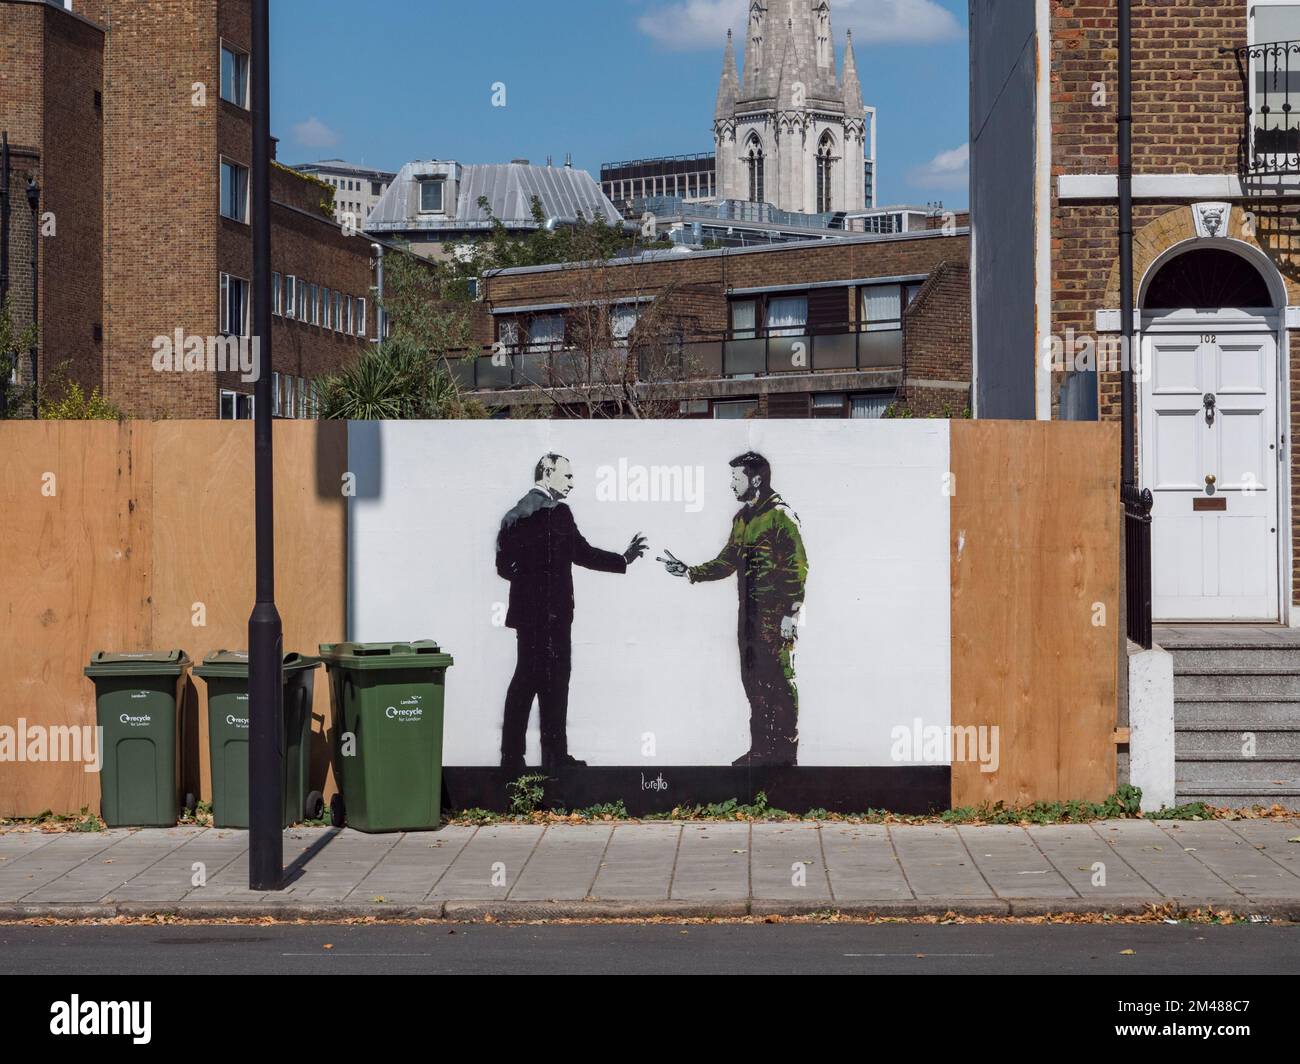 Street art by Loretto showing Vladimer Putin attempting to shake hands with a two-finger saluting Volodymyr Zelenskyy, Lambeth, London, UK. Stock Photo